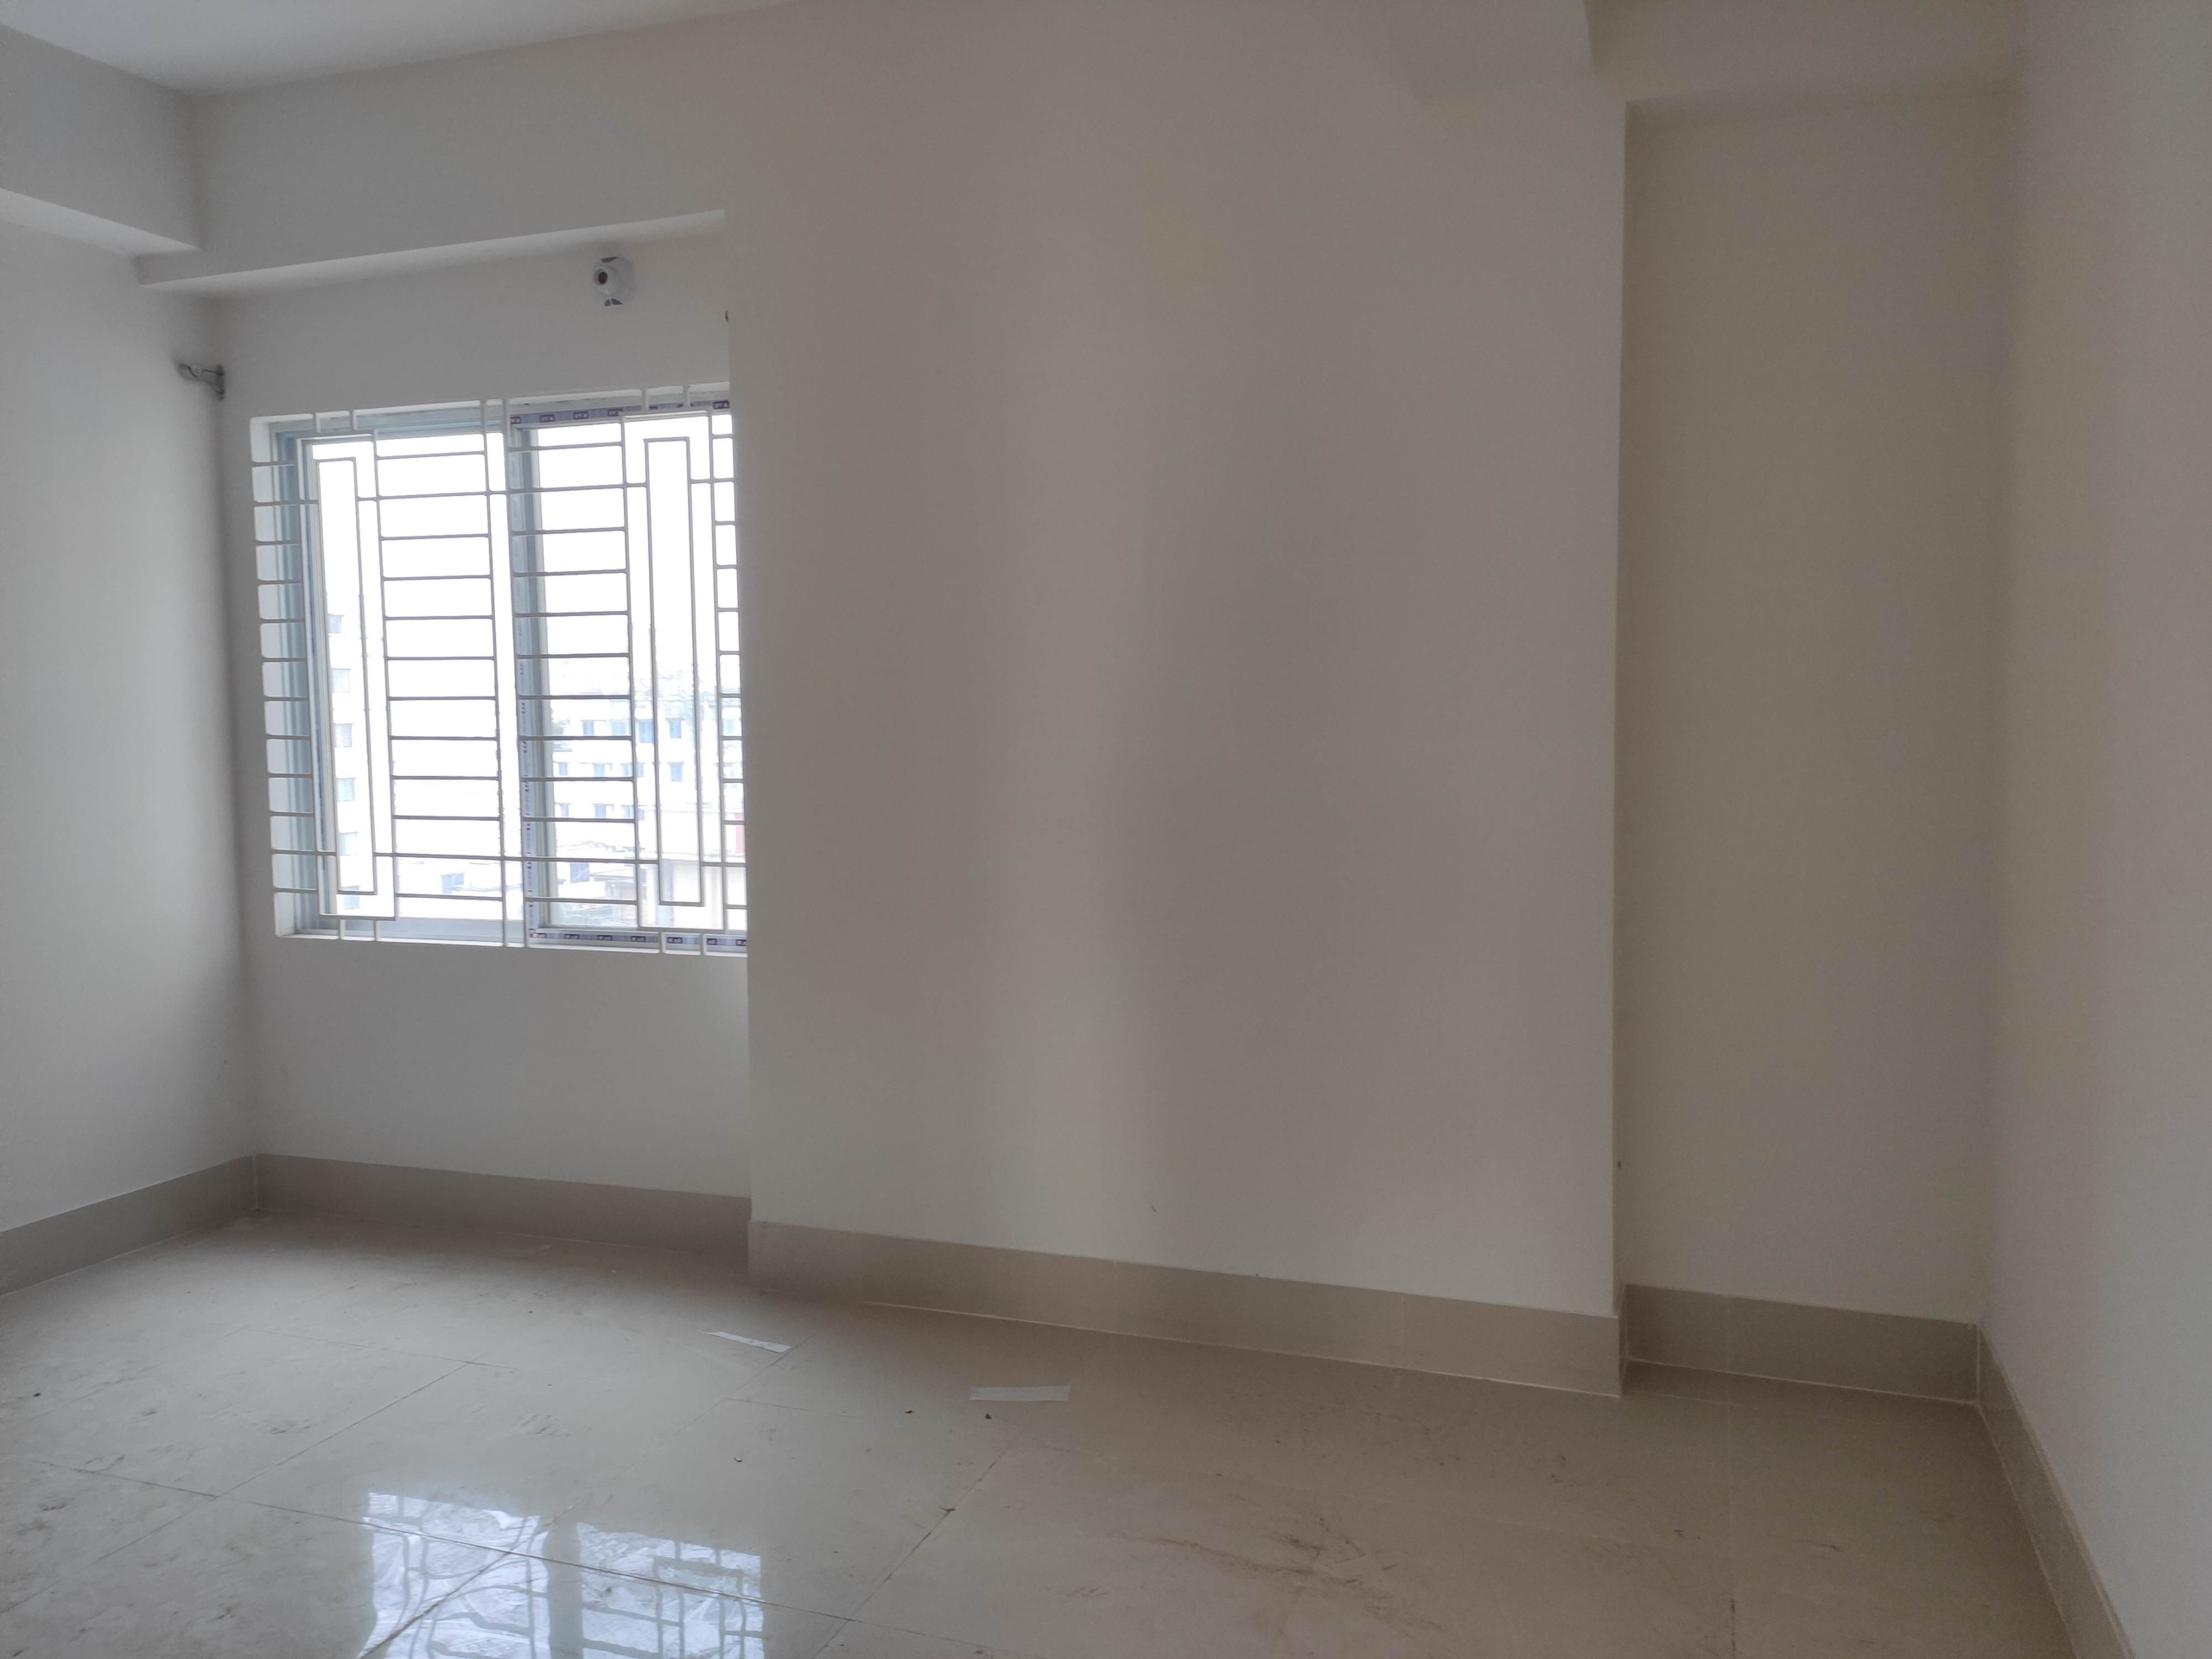 1250-sft-apartment-for-sale-in-cantonment-flat-c-8-867994